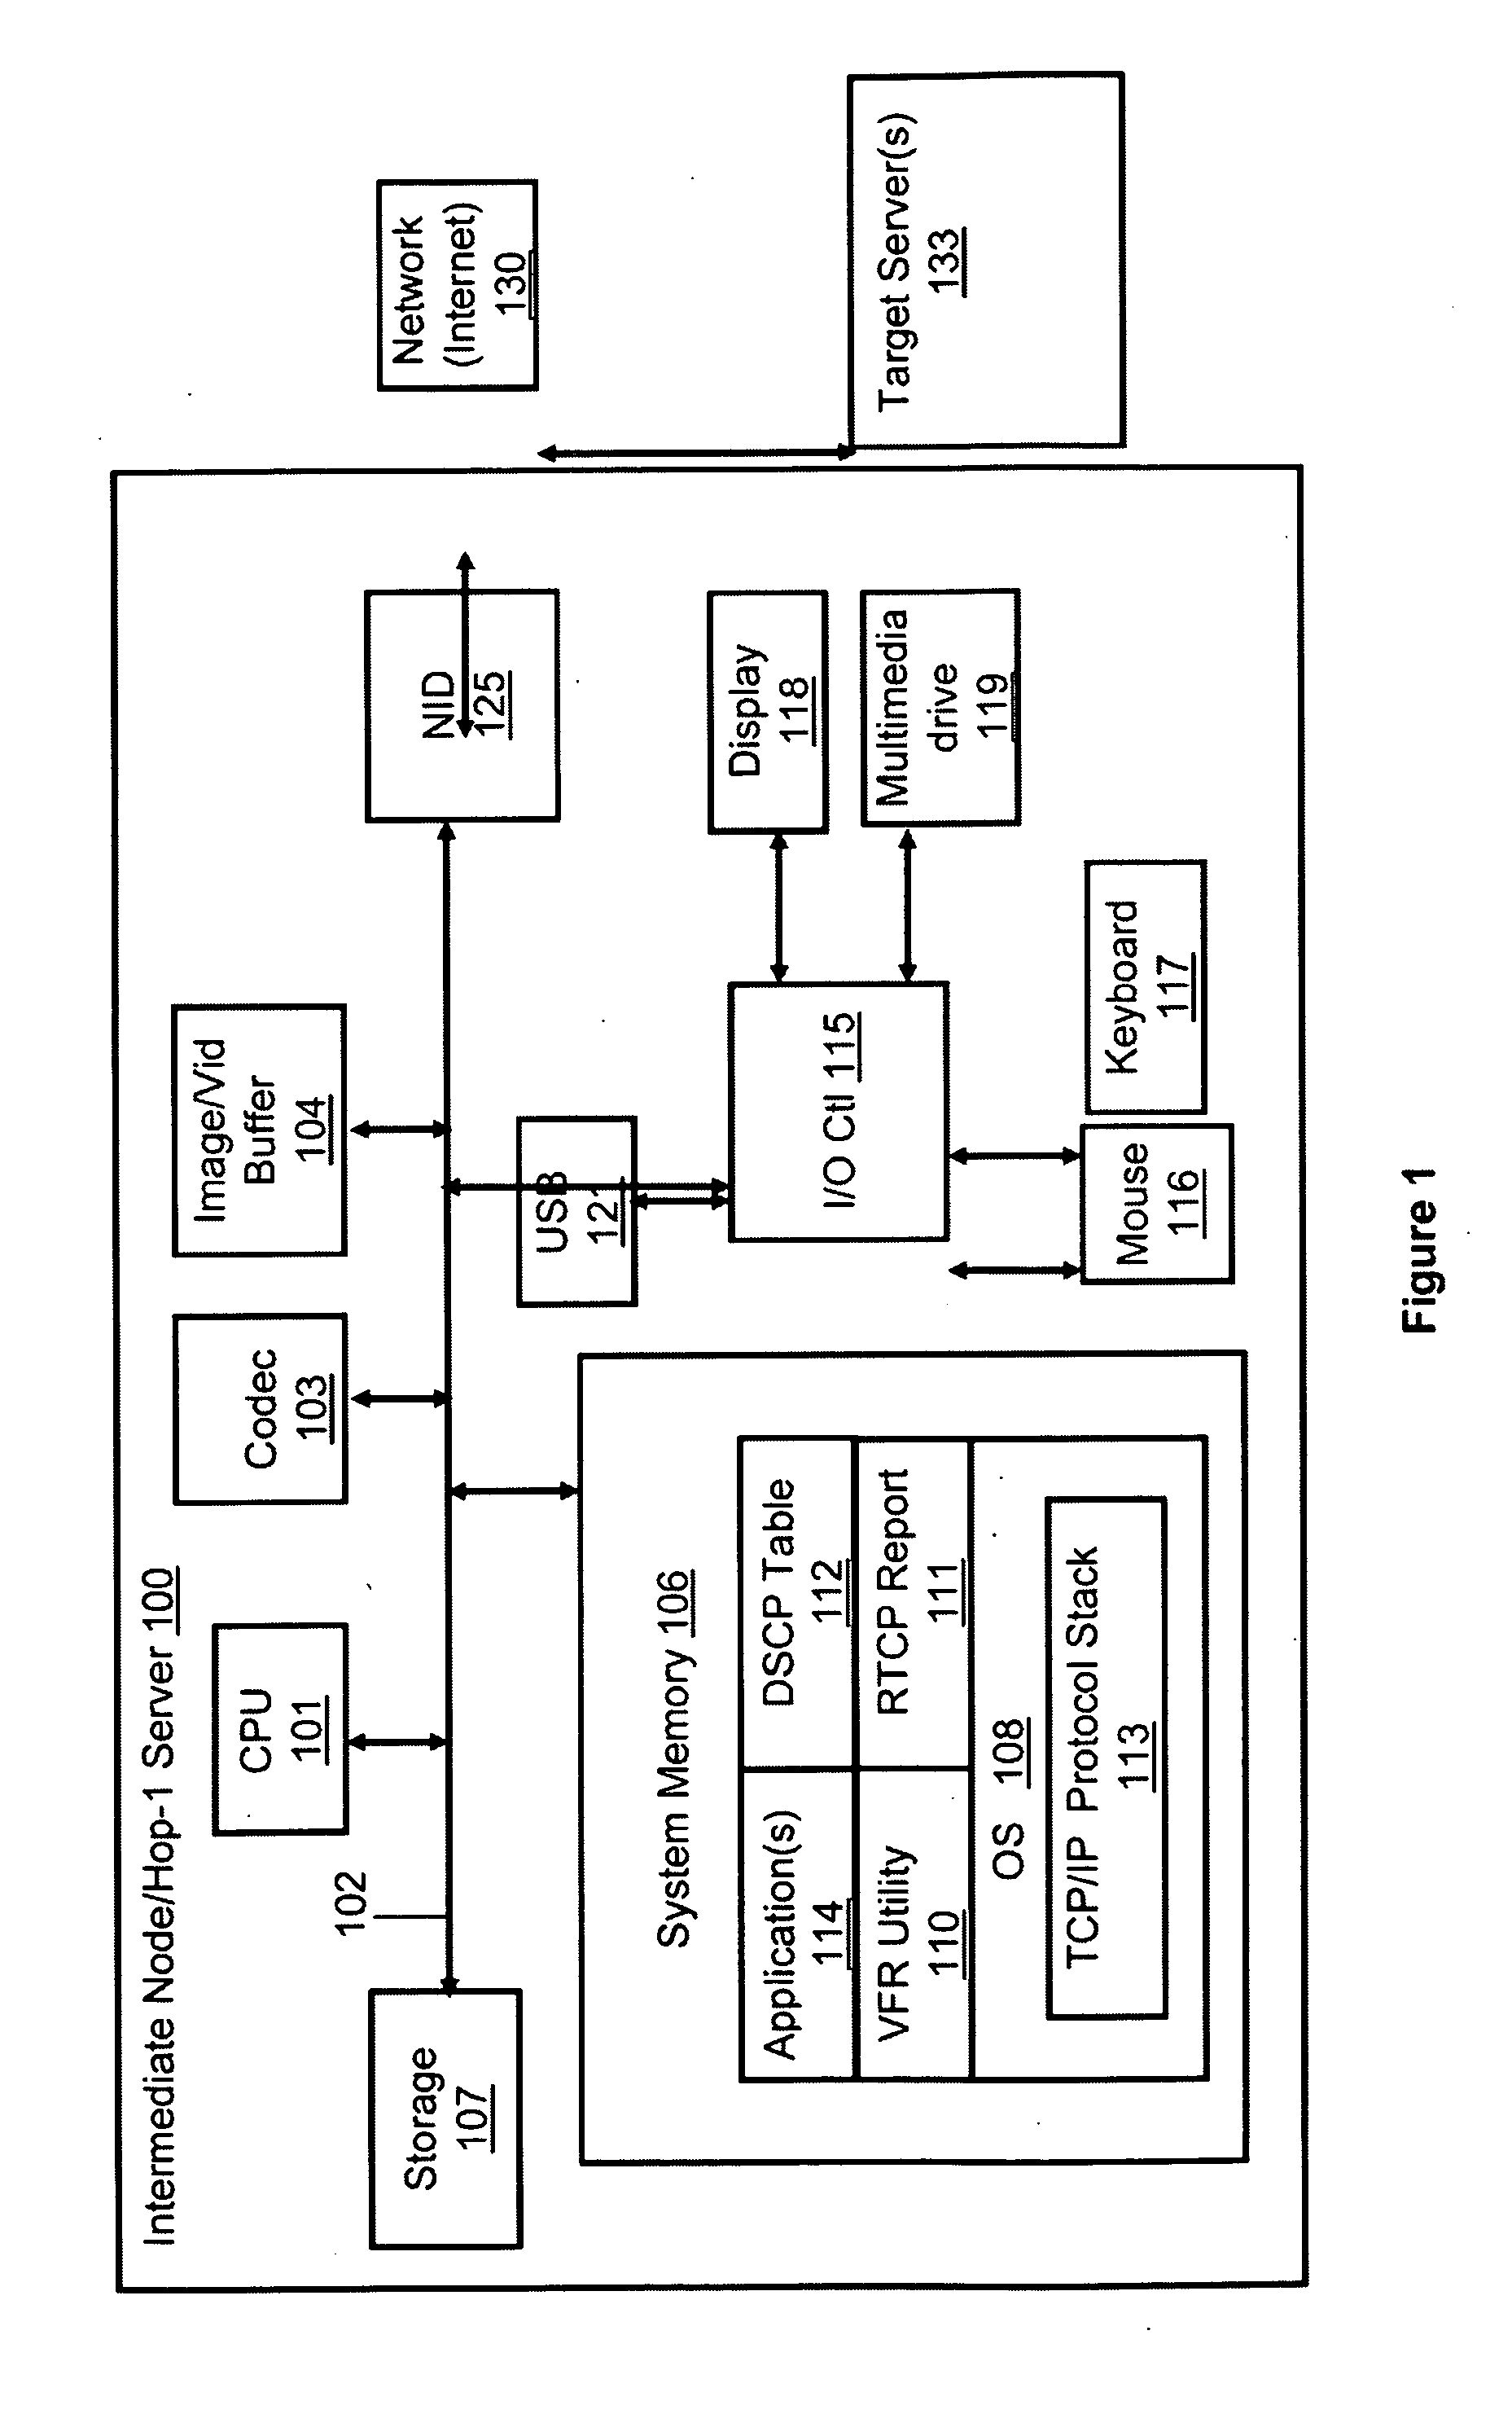 Bi-directional video compression for real-time video streams during transport in a packet switched network